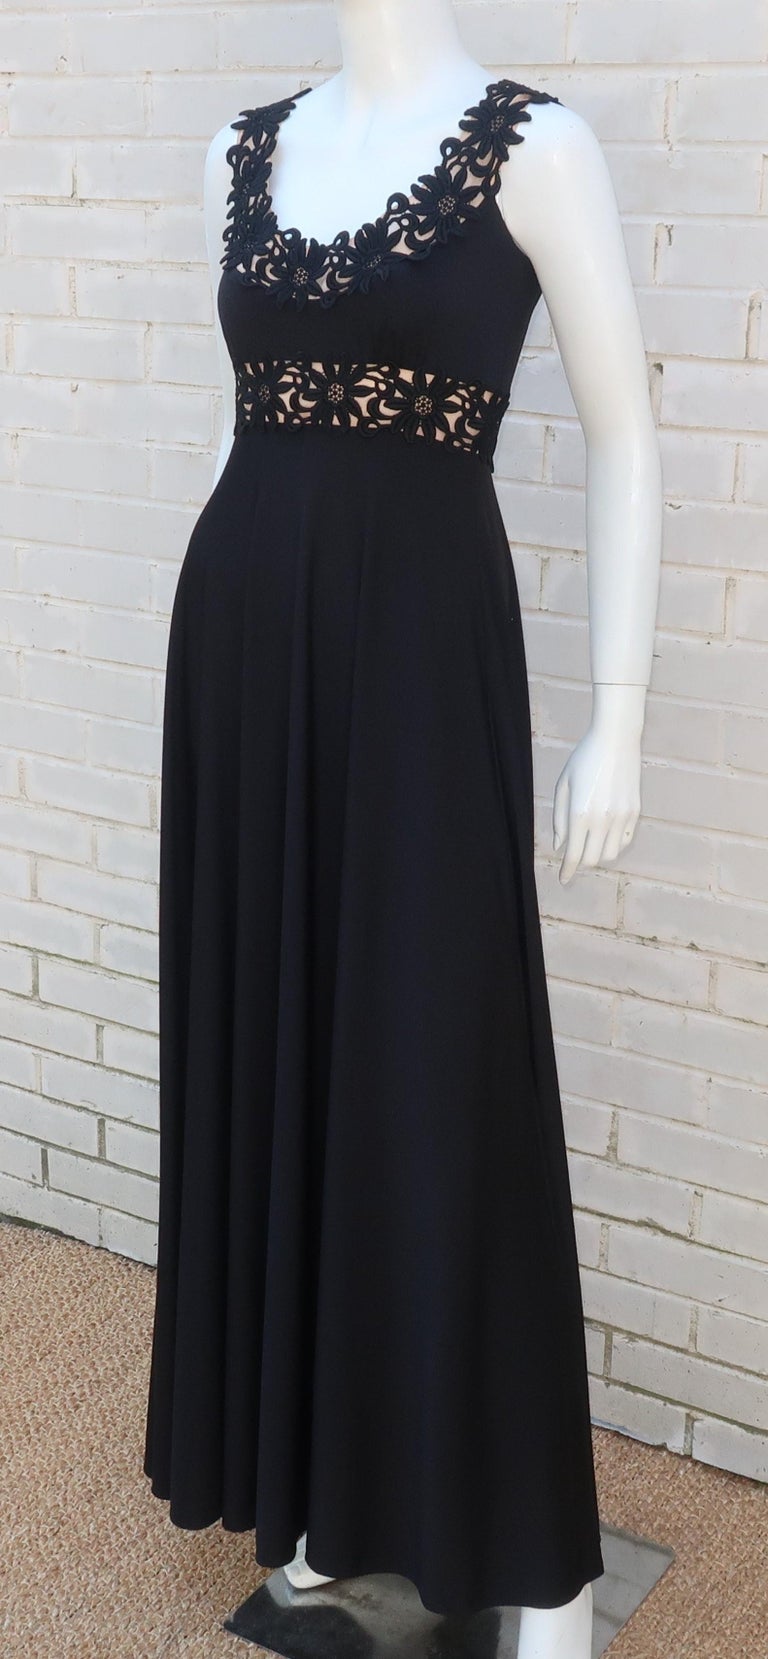 Get a sweet but not so innocent look with this black jersey maxi dress from Lillie Rubin's Collection 700 label C.1970.  The youthful style emphasizes curves with an empire construction and nude panels accented by floral appliques that create the